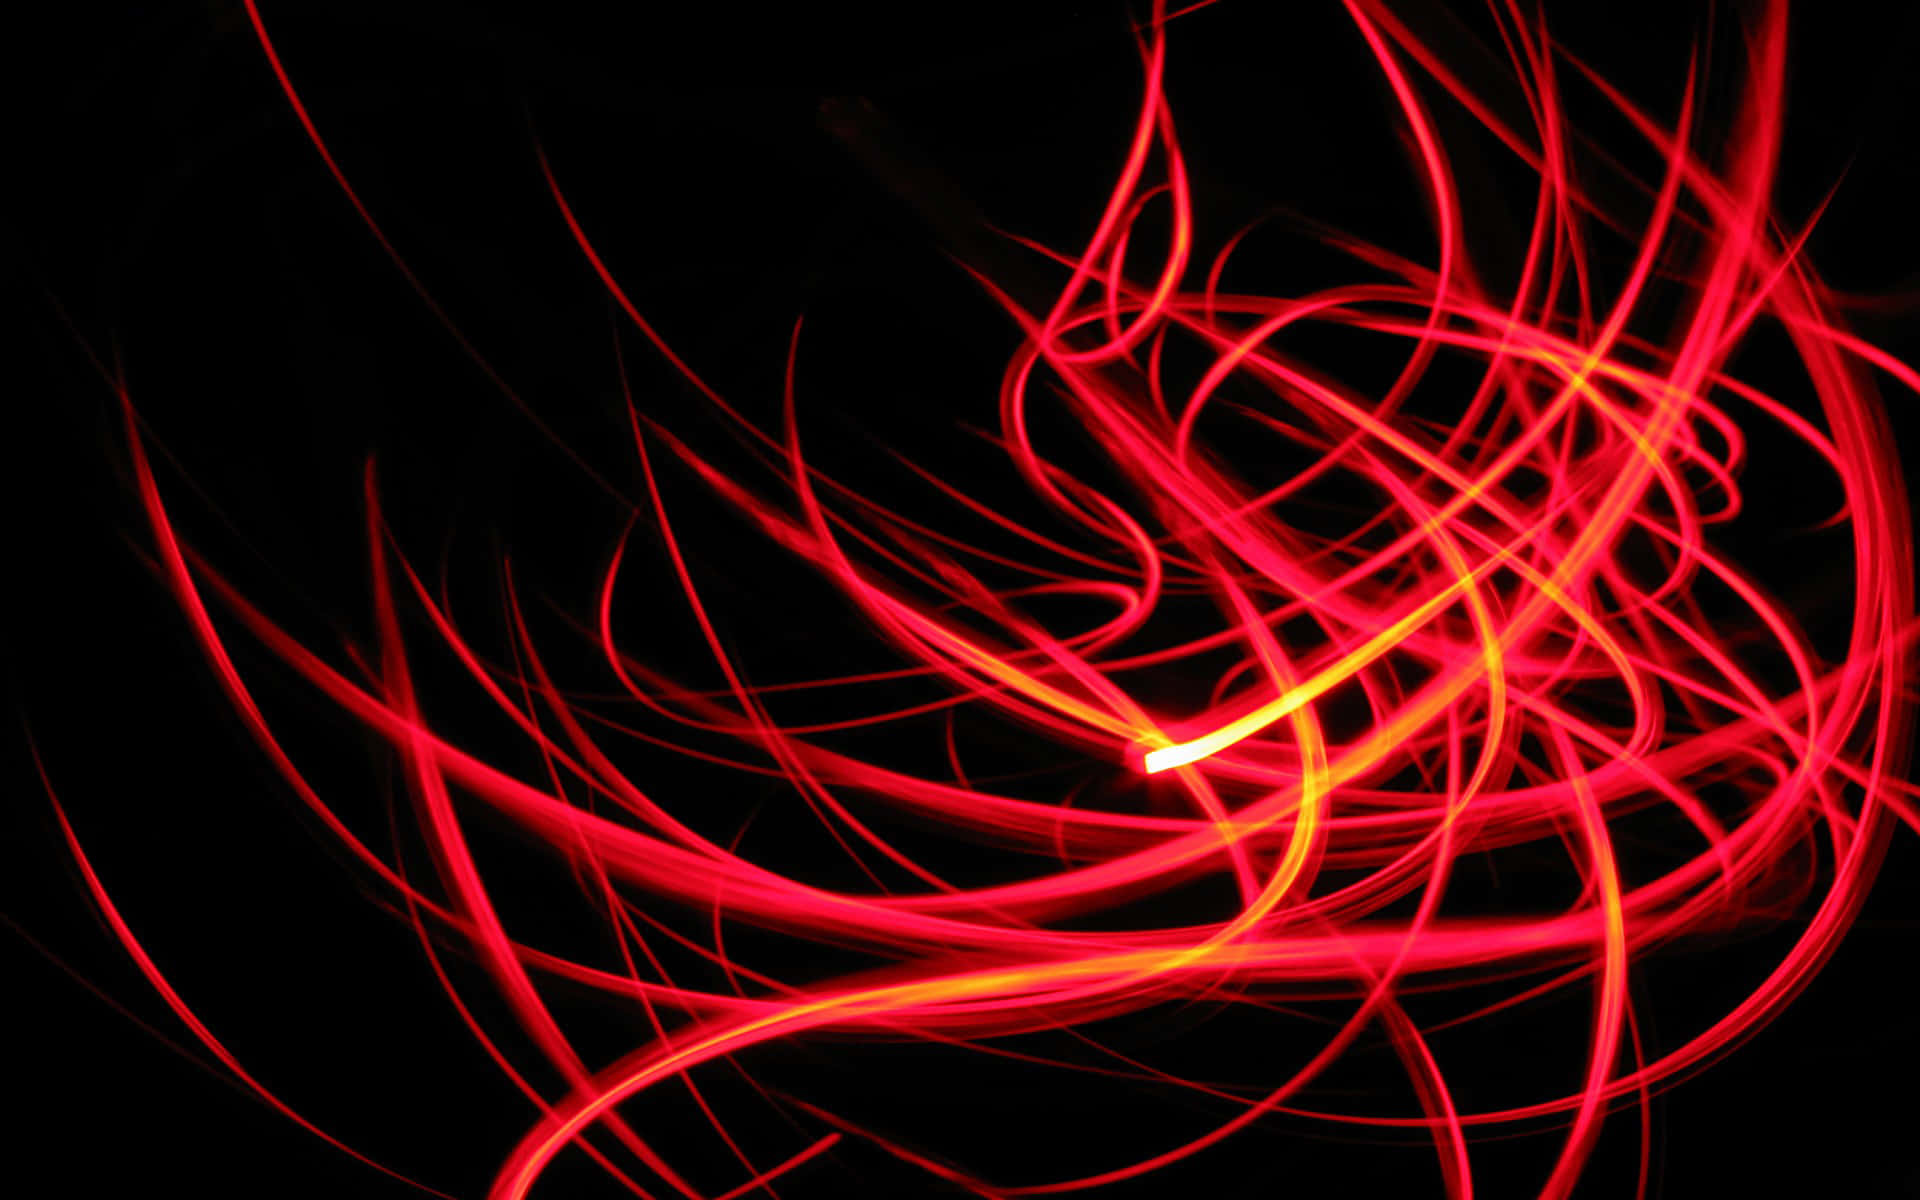 A vivid red neon background perfect to draw attention to your project